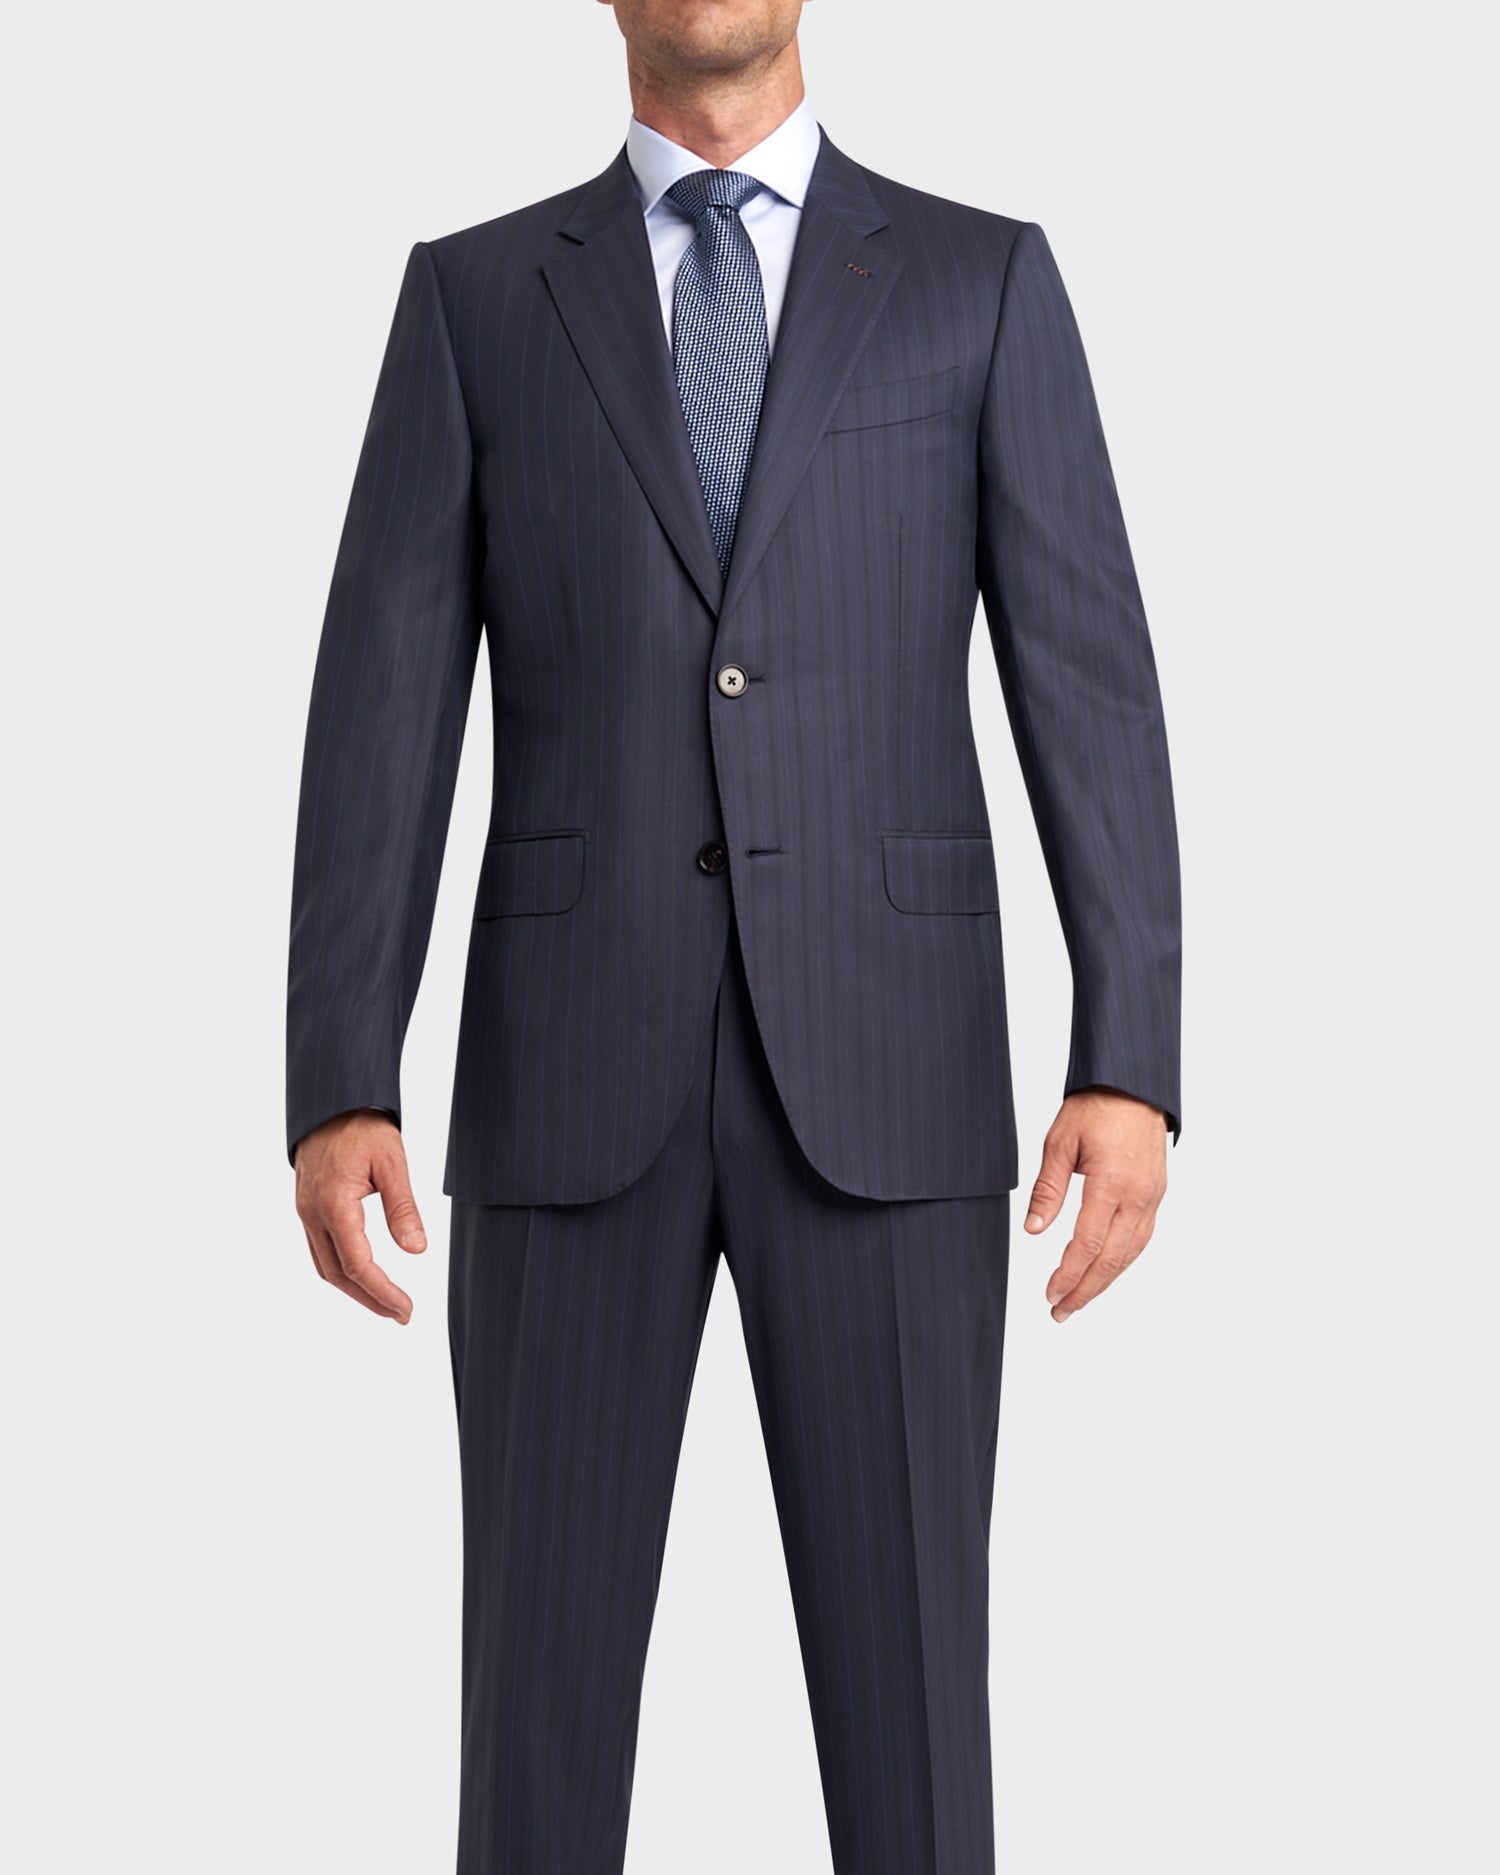 Navy Pinstripe Centoventimila Couture Suit